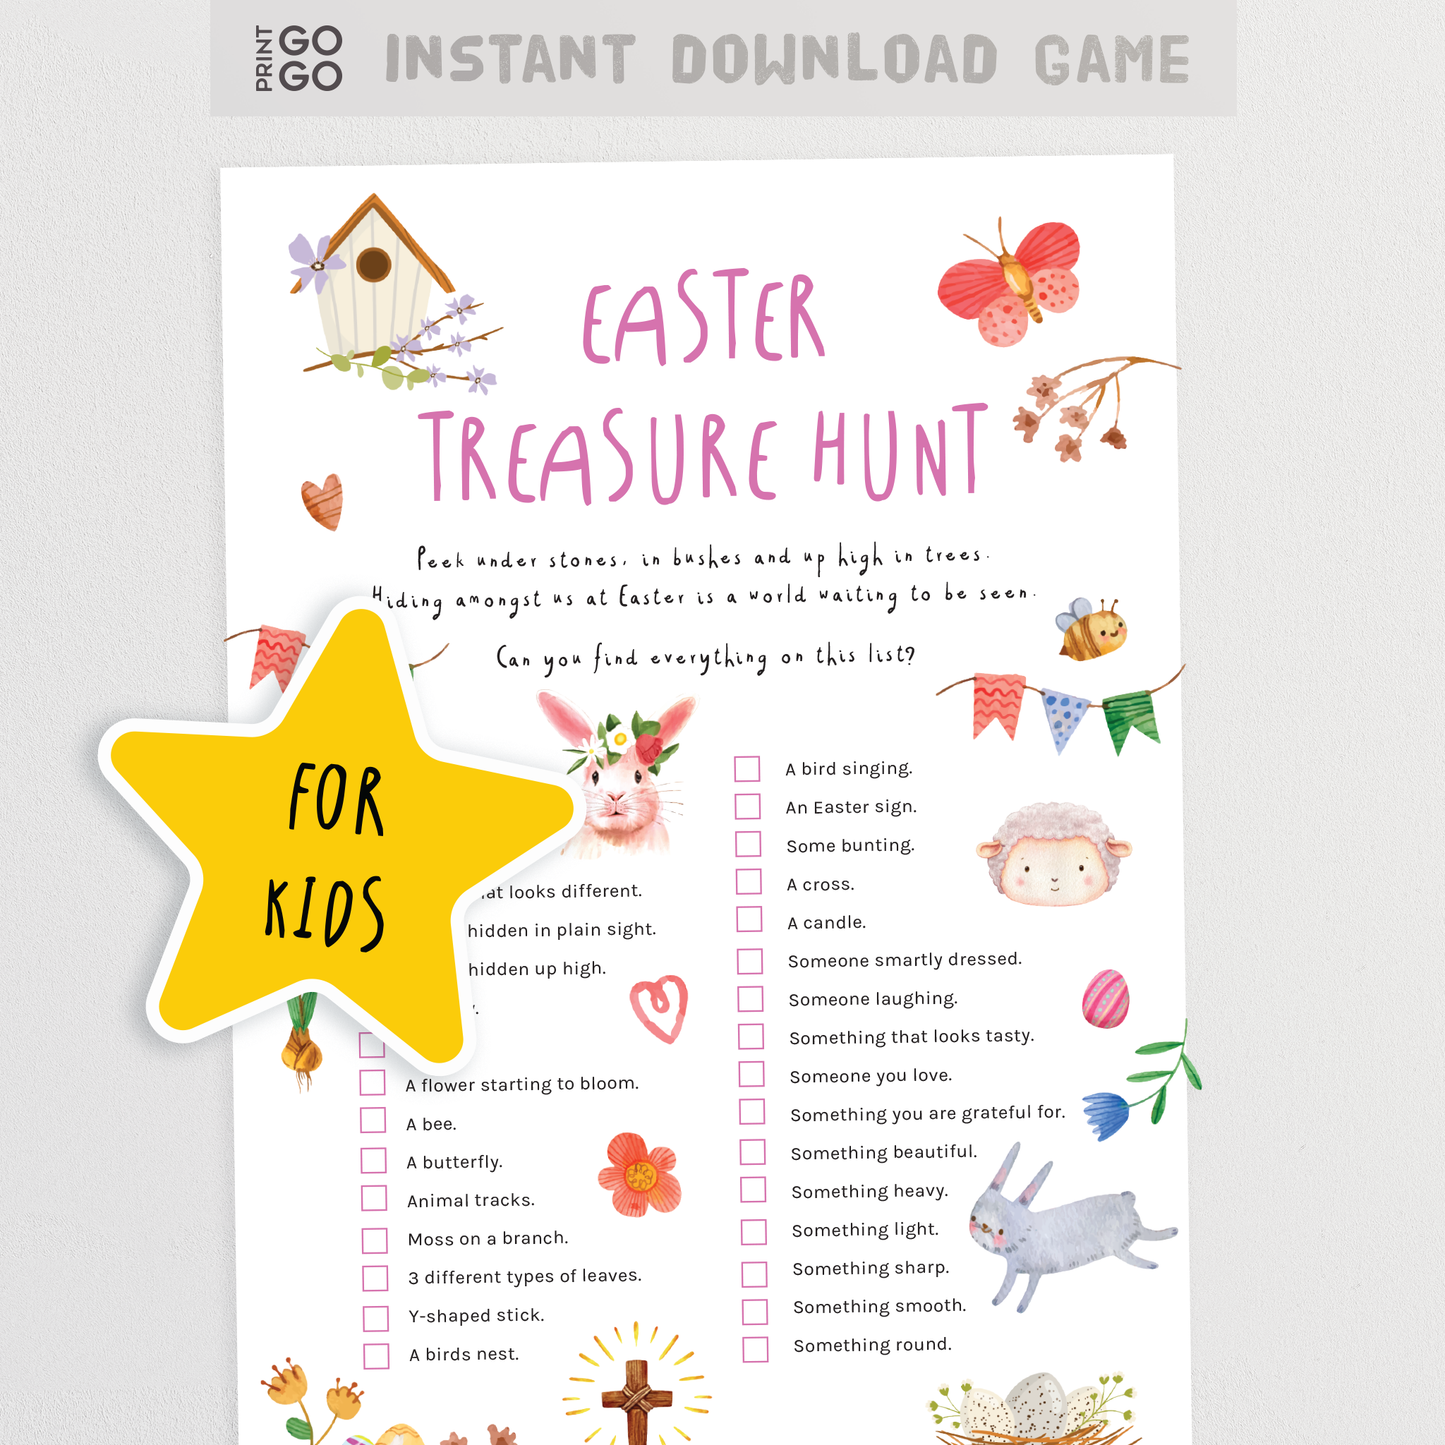 Easter Treasure Hunt - The Wholesome Outdoor Activity for Creative Kids